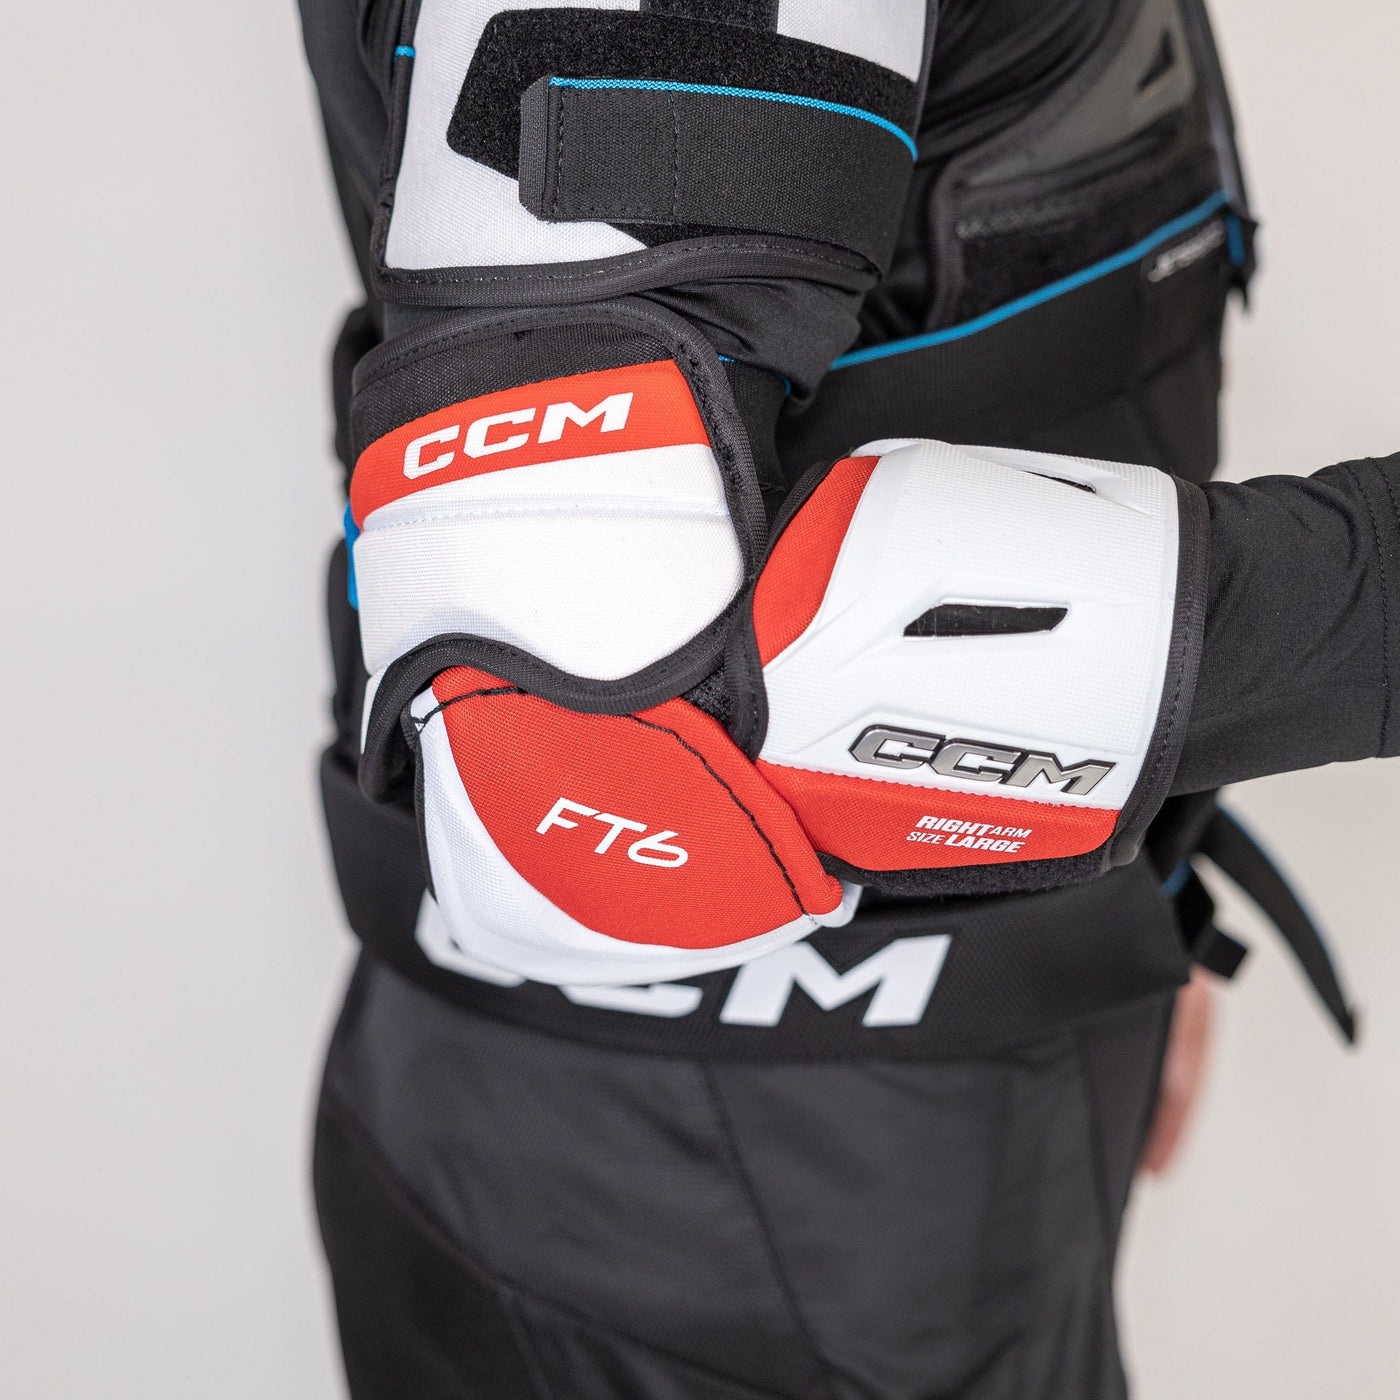 CCM Jetspeed FT6 Senior Hockey Elbow Pads - The Hockey Shop Source For Sports